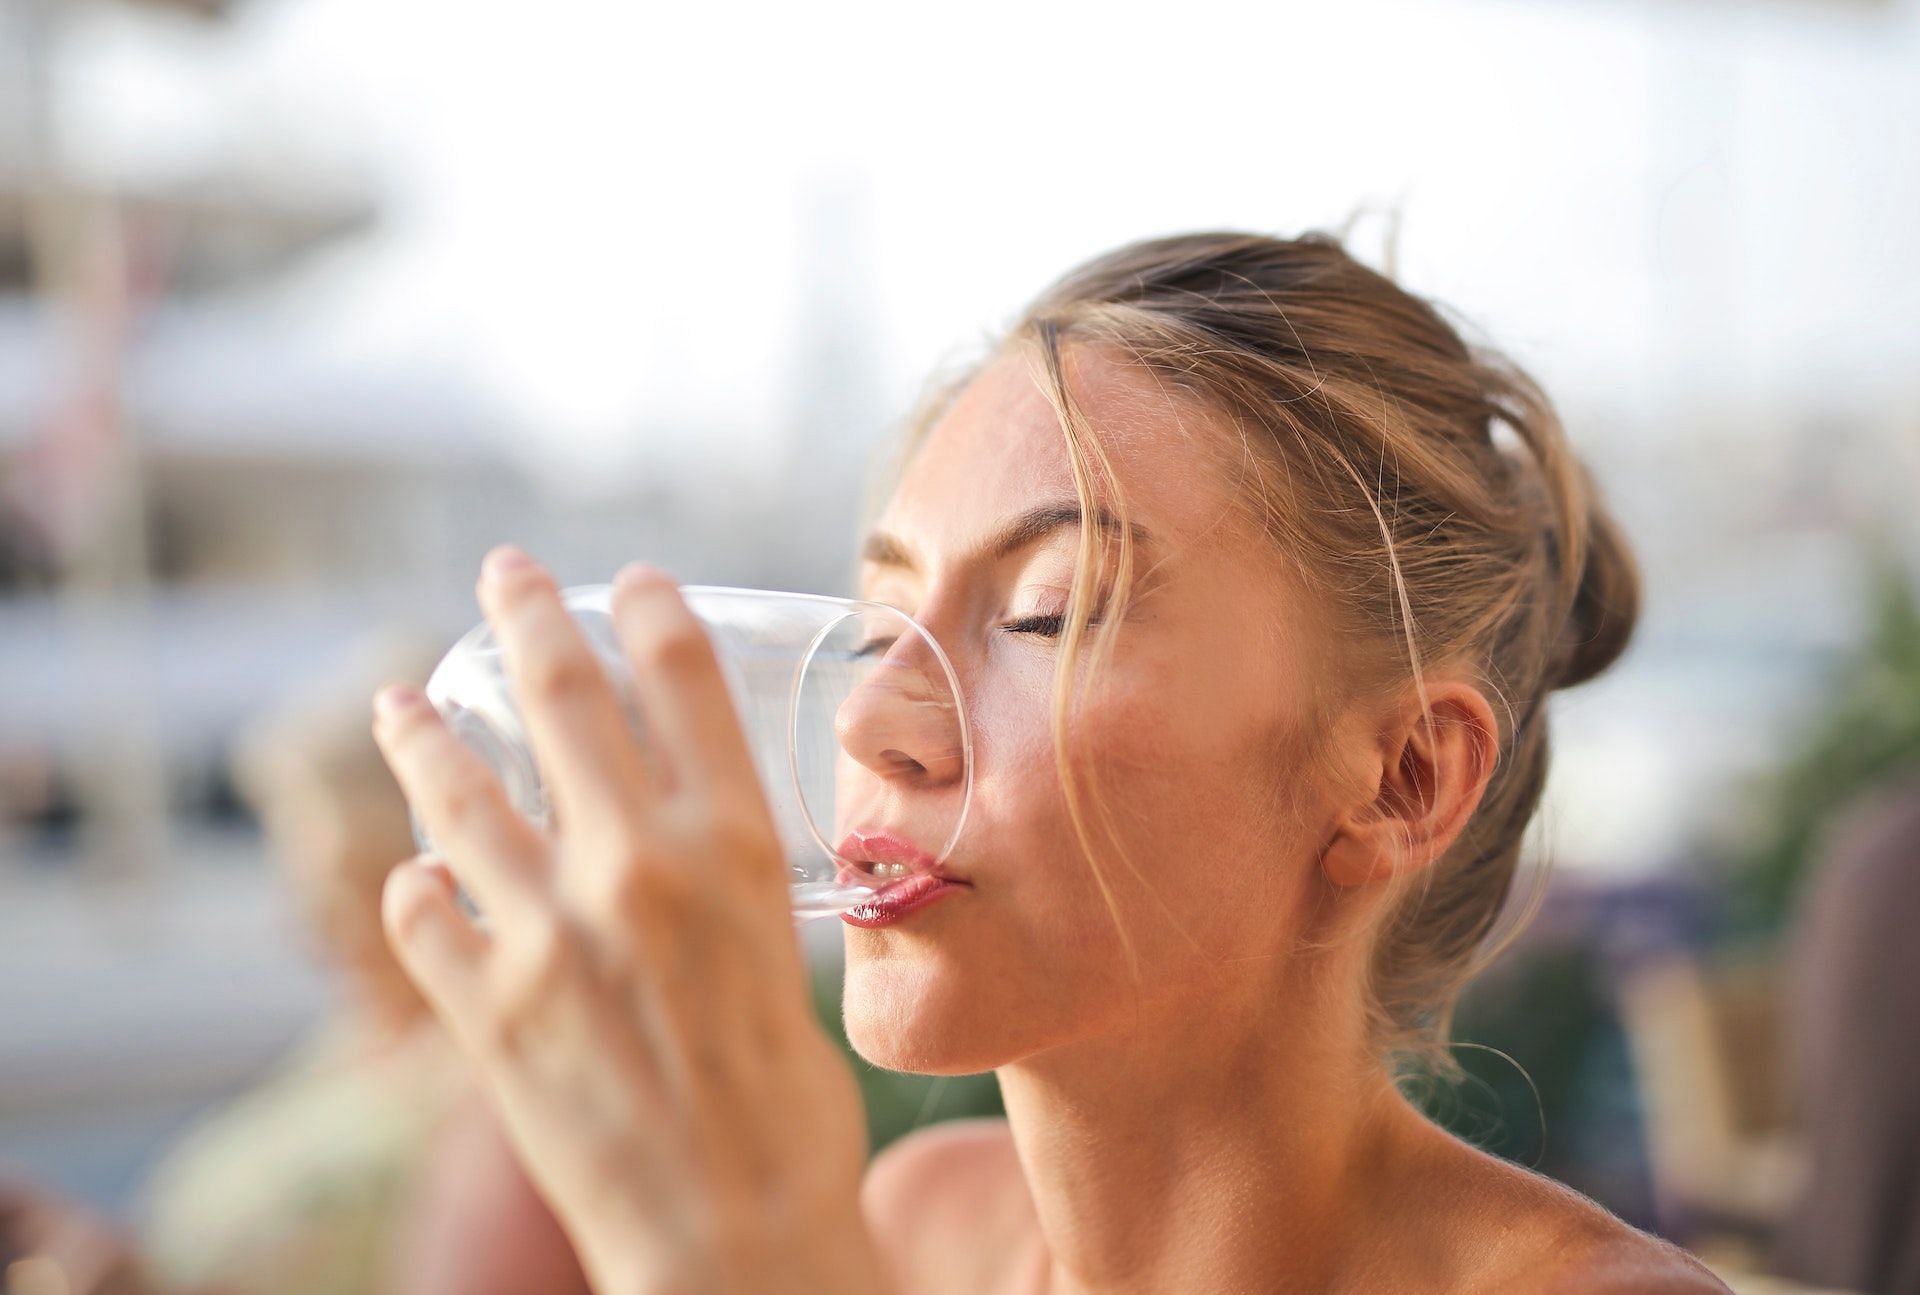 Drinking eight glasses of water every day can prevent UTIs. (Photo via Pexels/Adrienn)